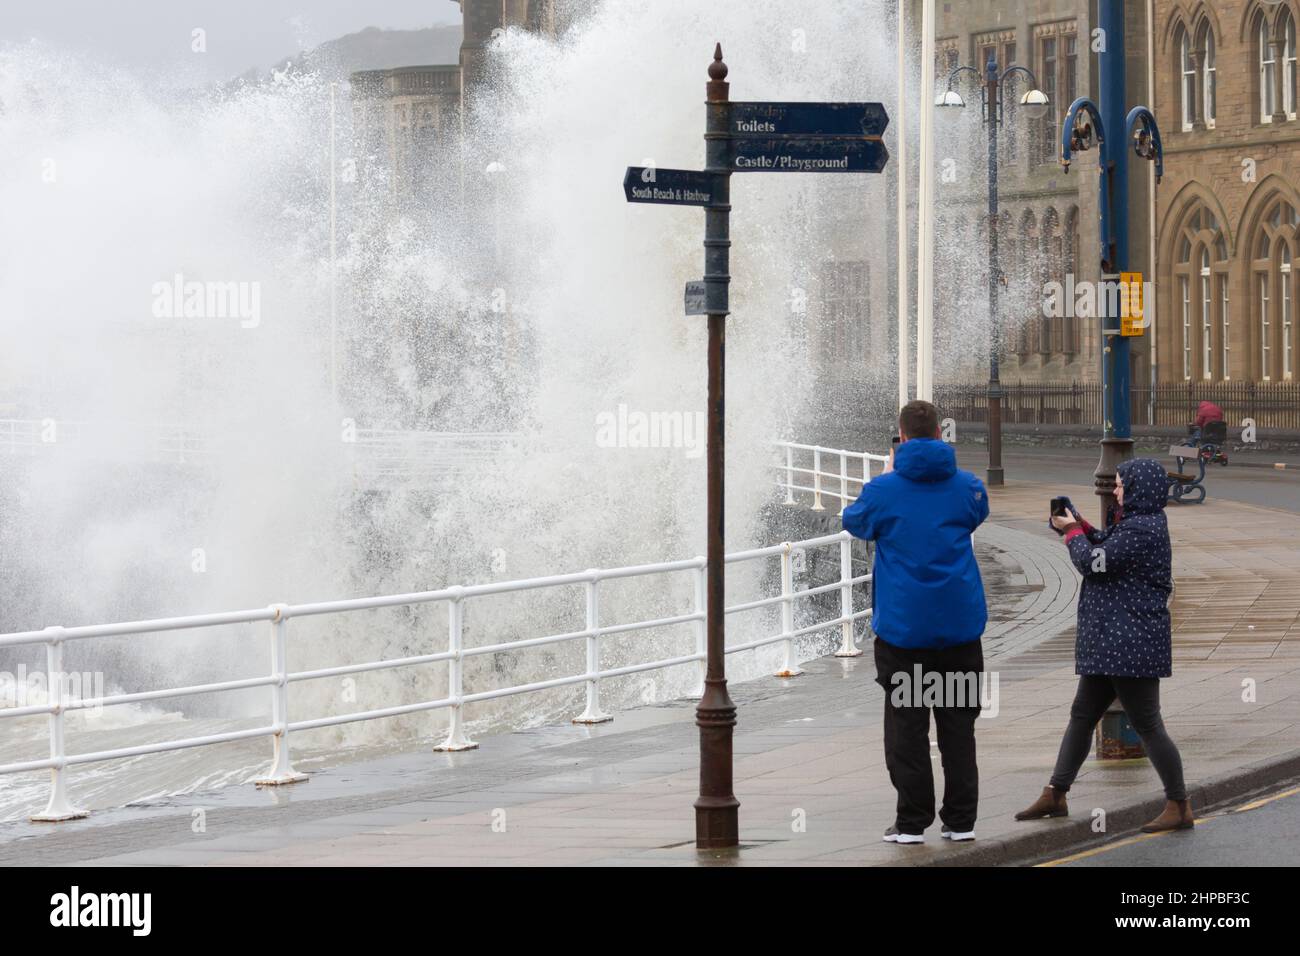 Aberystwyth, Ceredigion, Wales, UK. 20th February 2022  UK Weather: People brave the windy weather as they take photos while walking along the promenade, as Stormy weather continues along the west coast of Aberystwyth. with combining high tide, bringing rough seas crashing against the promenade and sea defences. © Ian Jones/Alamy Live News Stock Photo